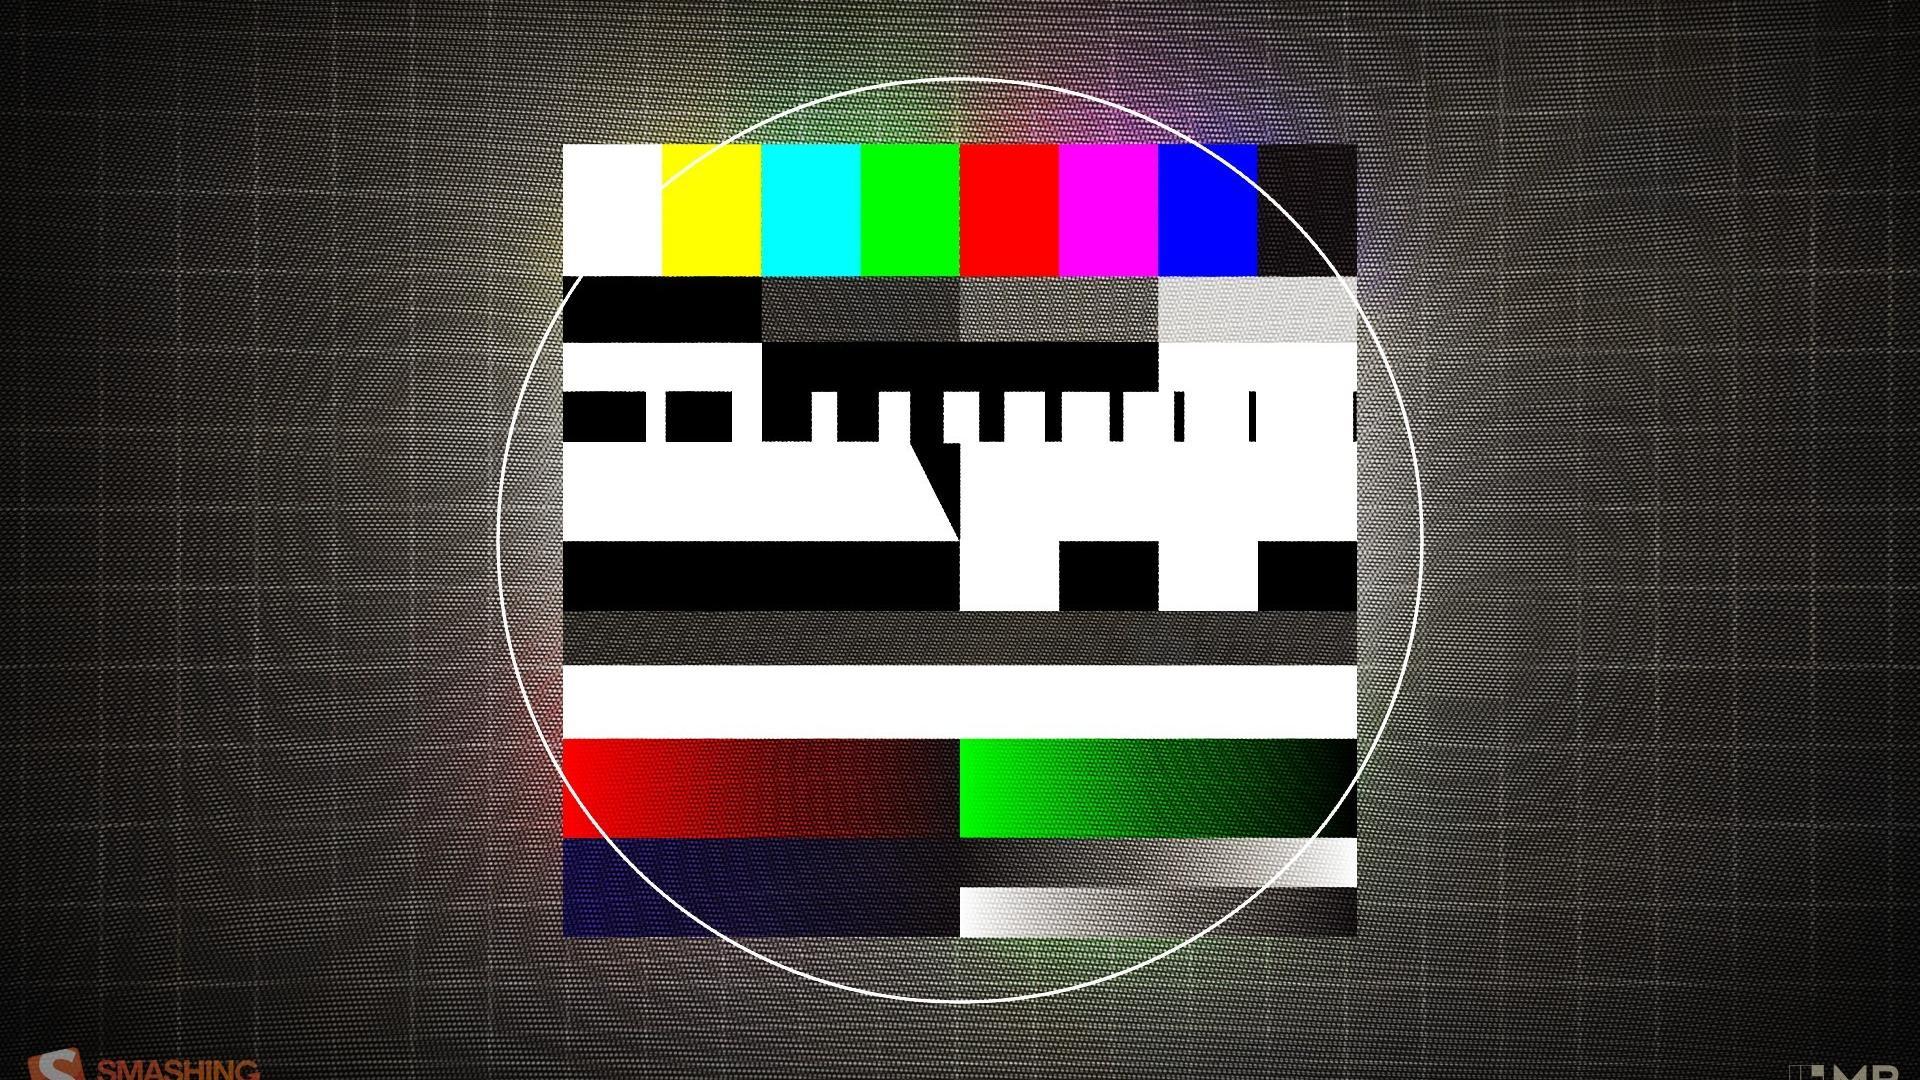 Multicolor grid television test pattern smashing magazine channel